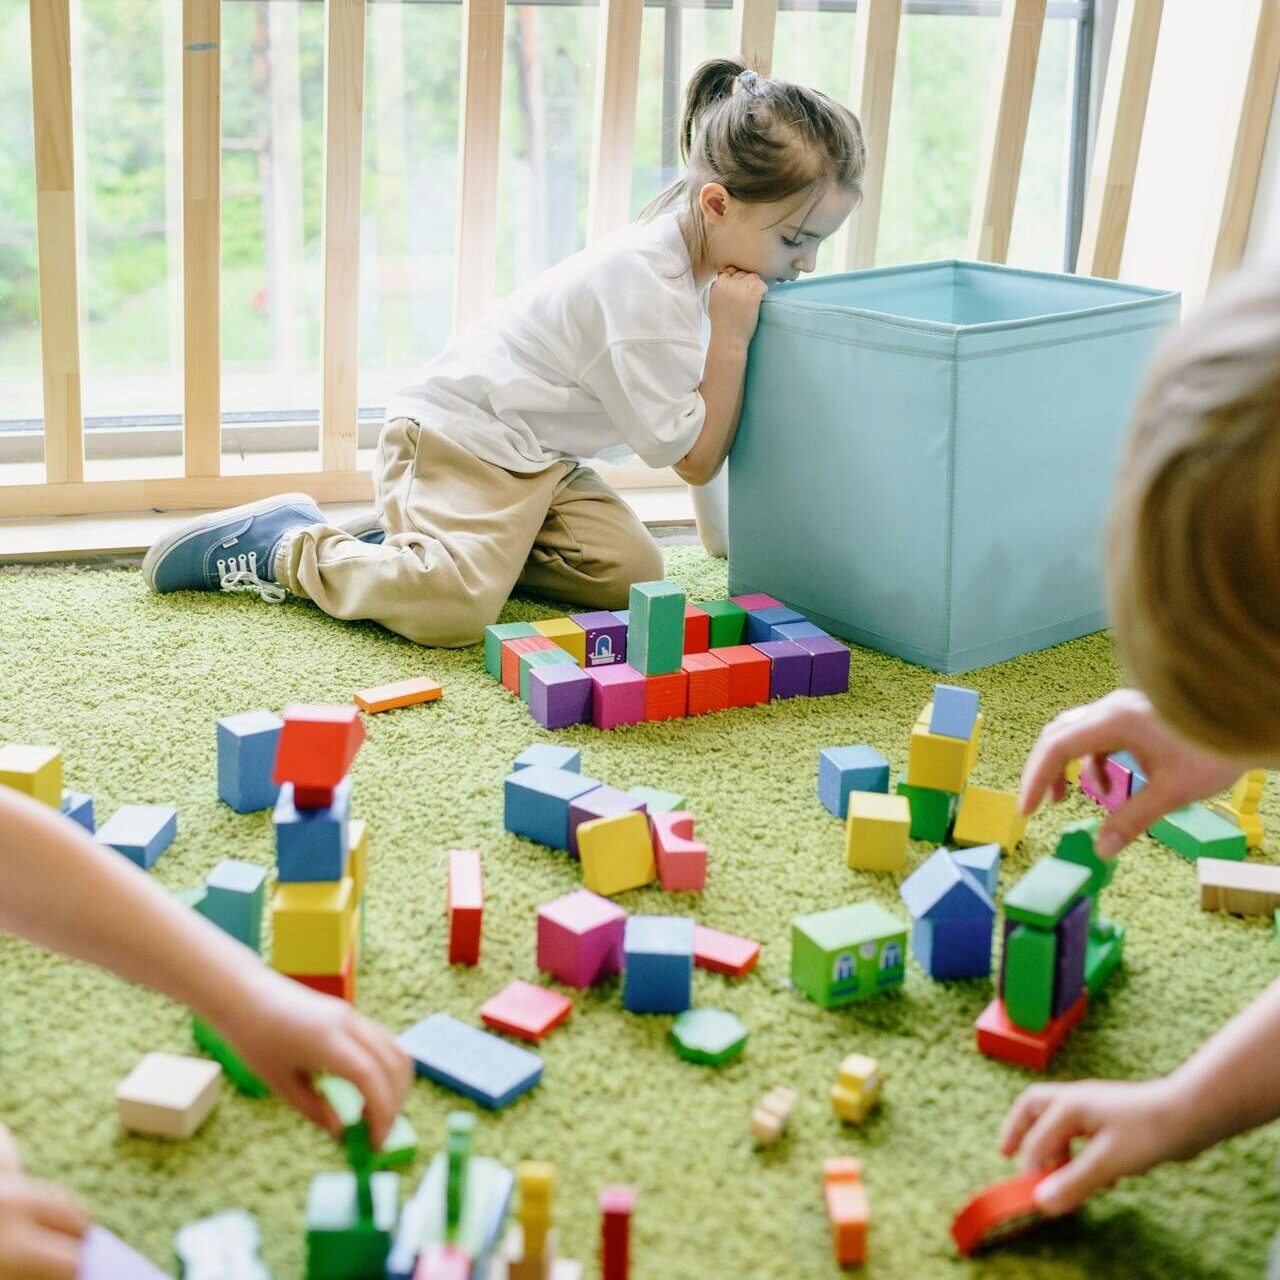 Multifaceted activity cubes for skill improvement